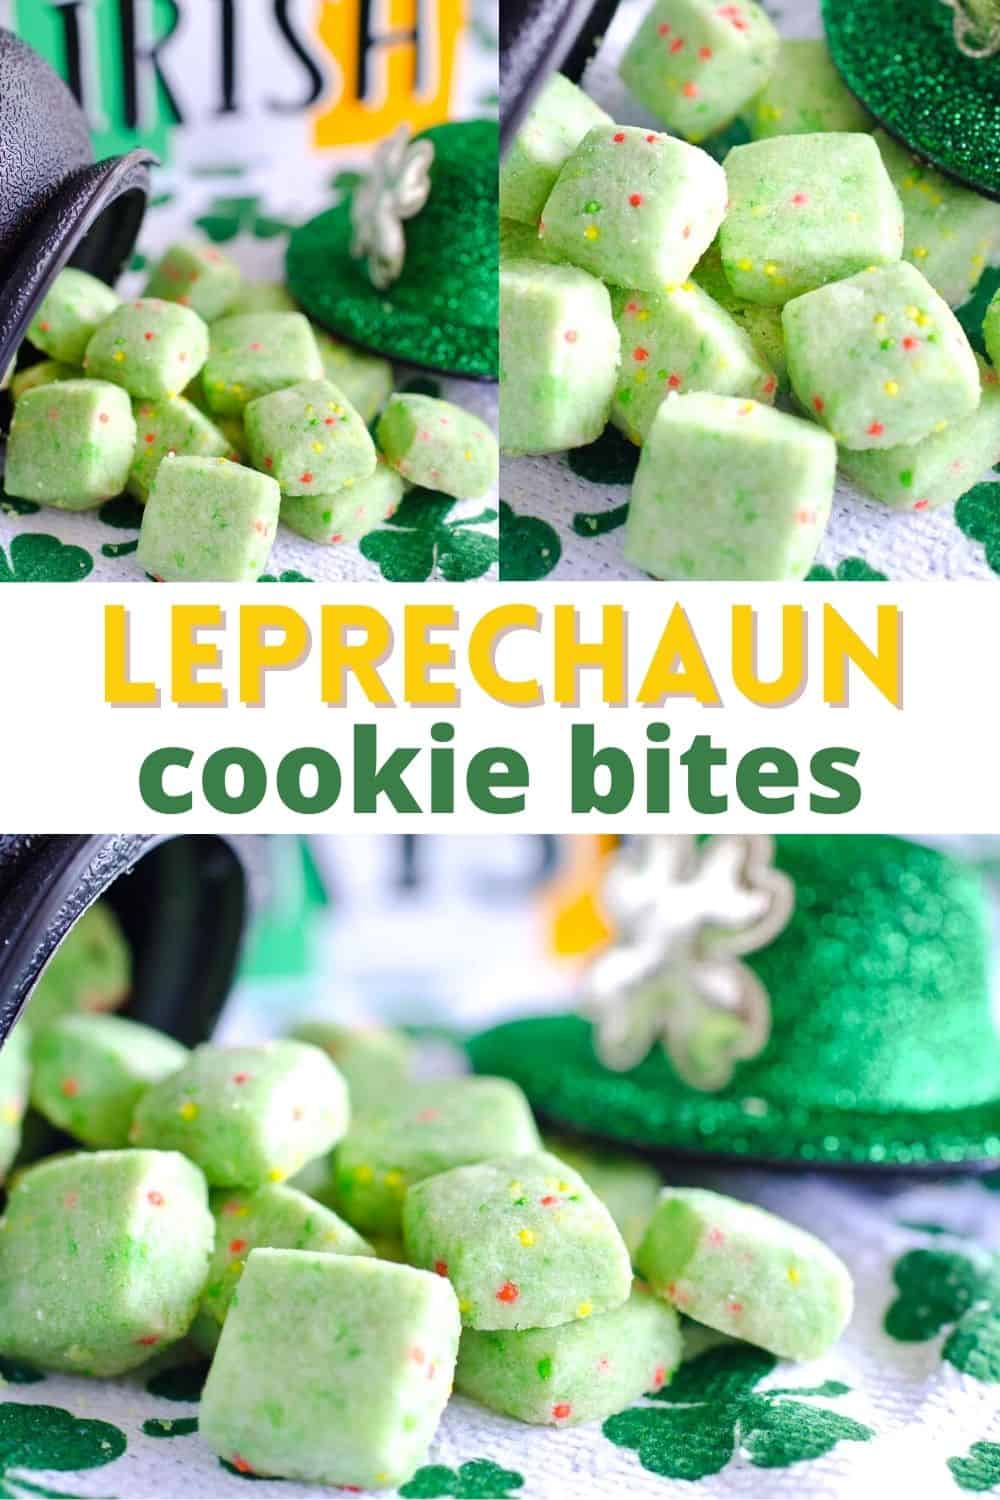 Leprechaun Bites are tiny shortbread cookies with festive sprinkles. These green cookies are perfect to bag up in treat bags or miniature cauldrons for festive Saint Patrick's Day gifts!